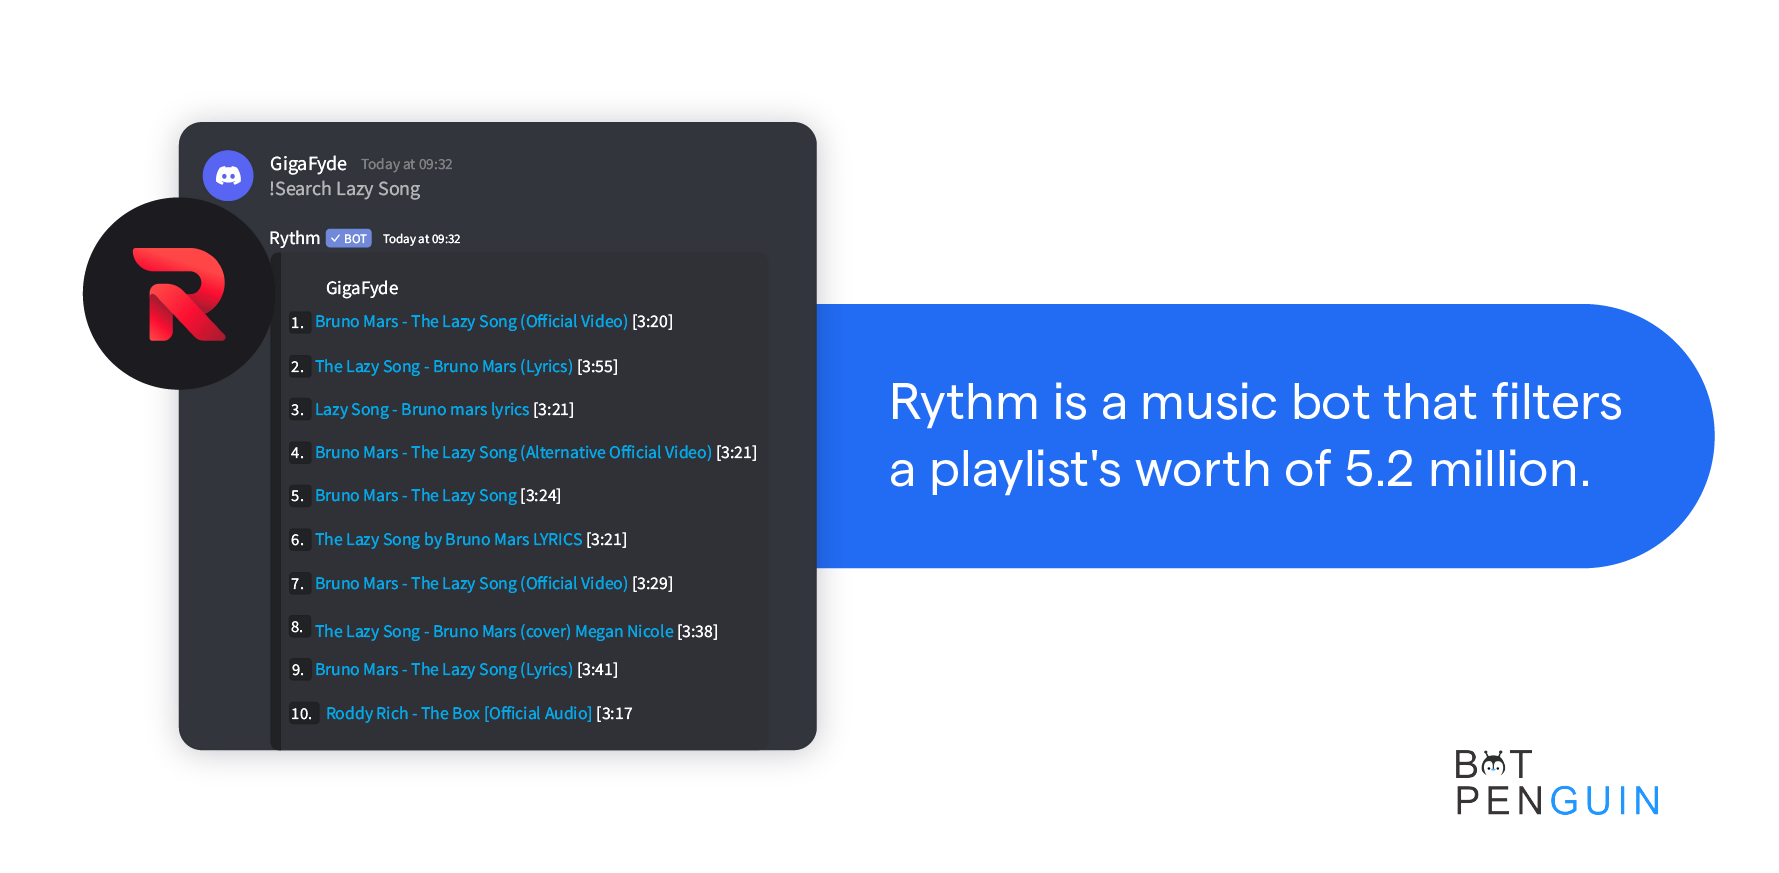 What is meant by Discord’s Rythm bot